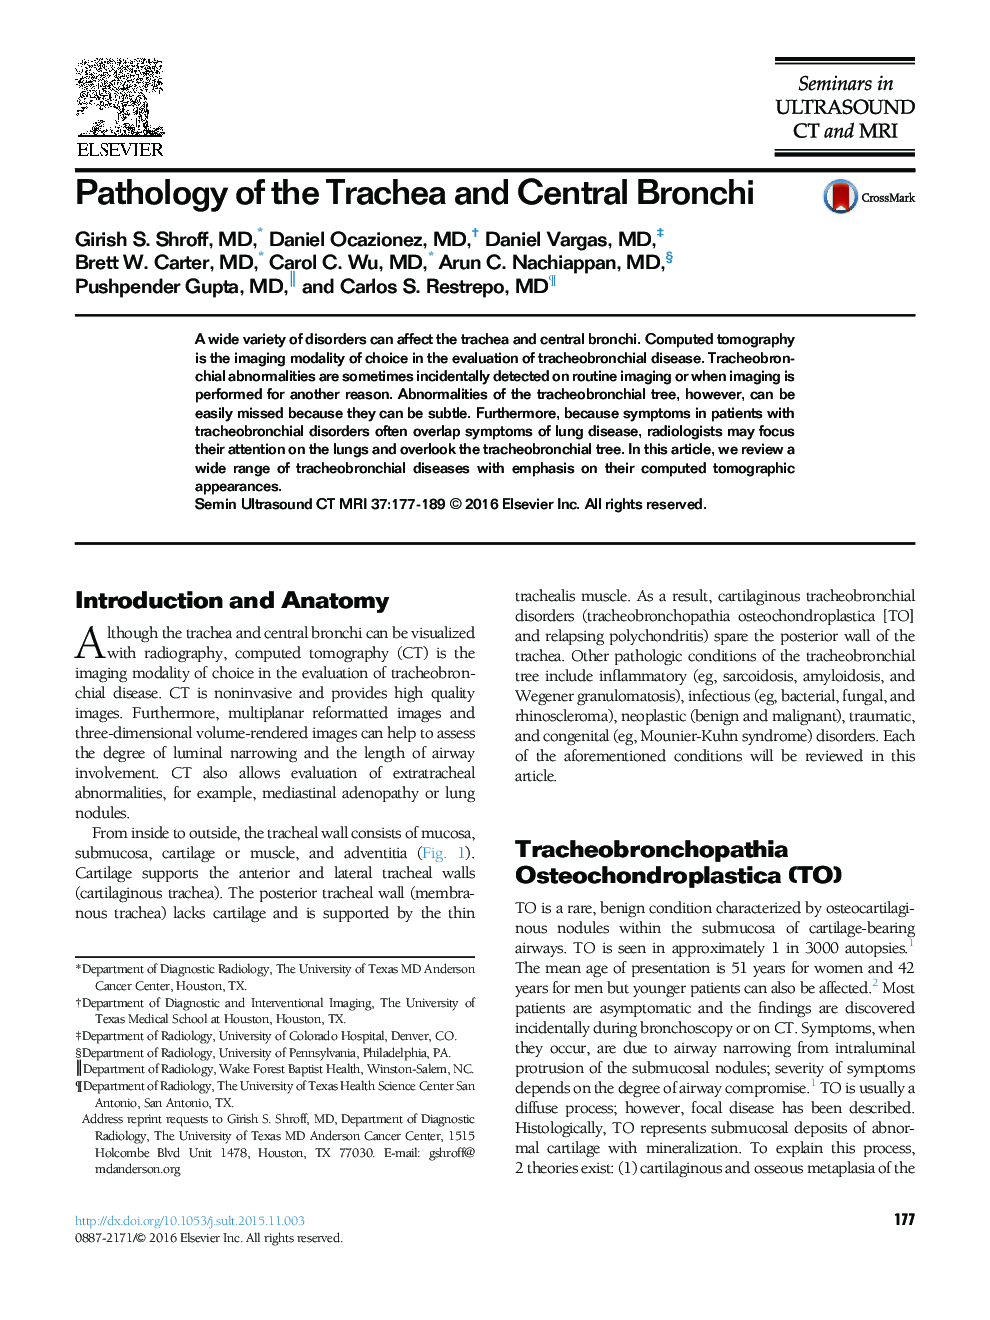 Pathology of the Trachea and Central Bronchi